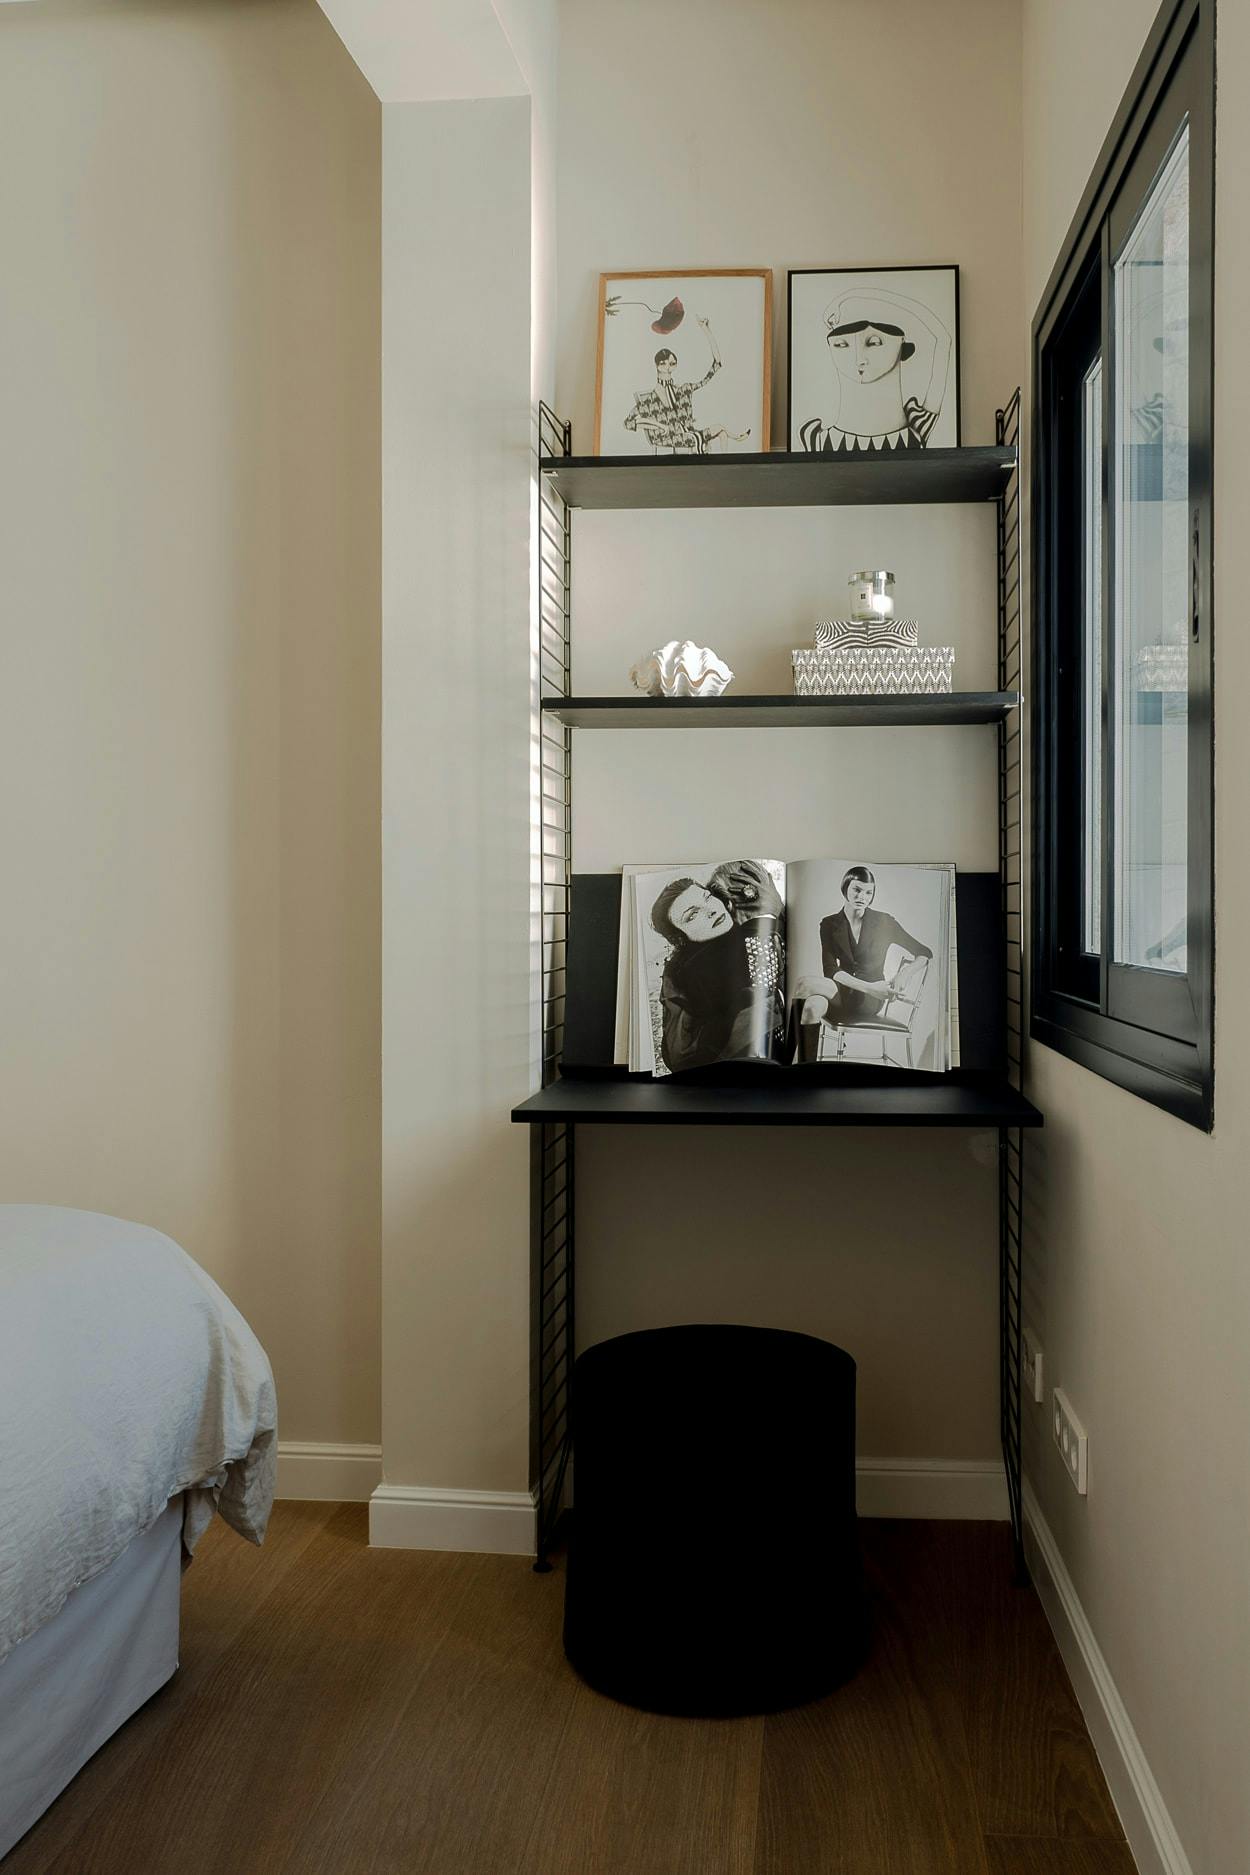 The image features a bedroom with a bed in the corner, a black bookshelf with a black book on top, and a window.